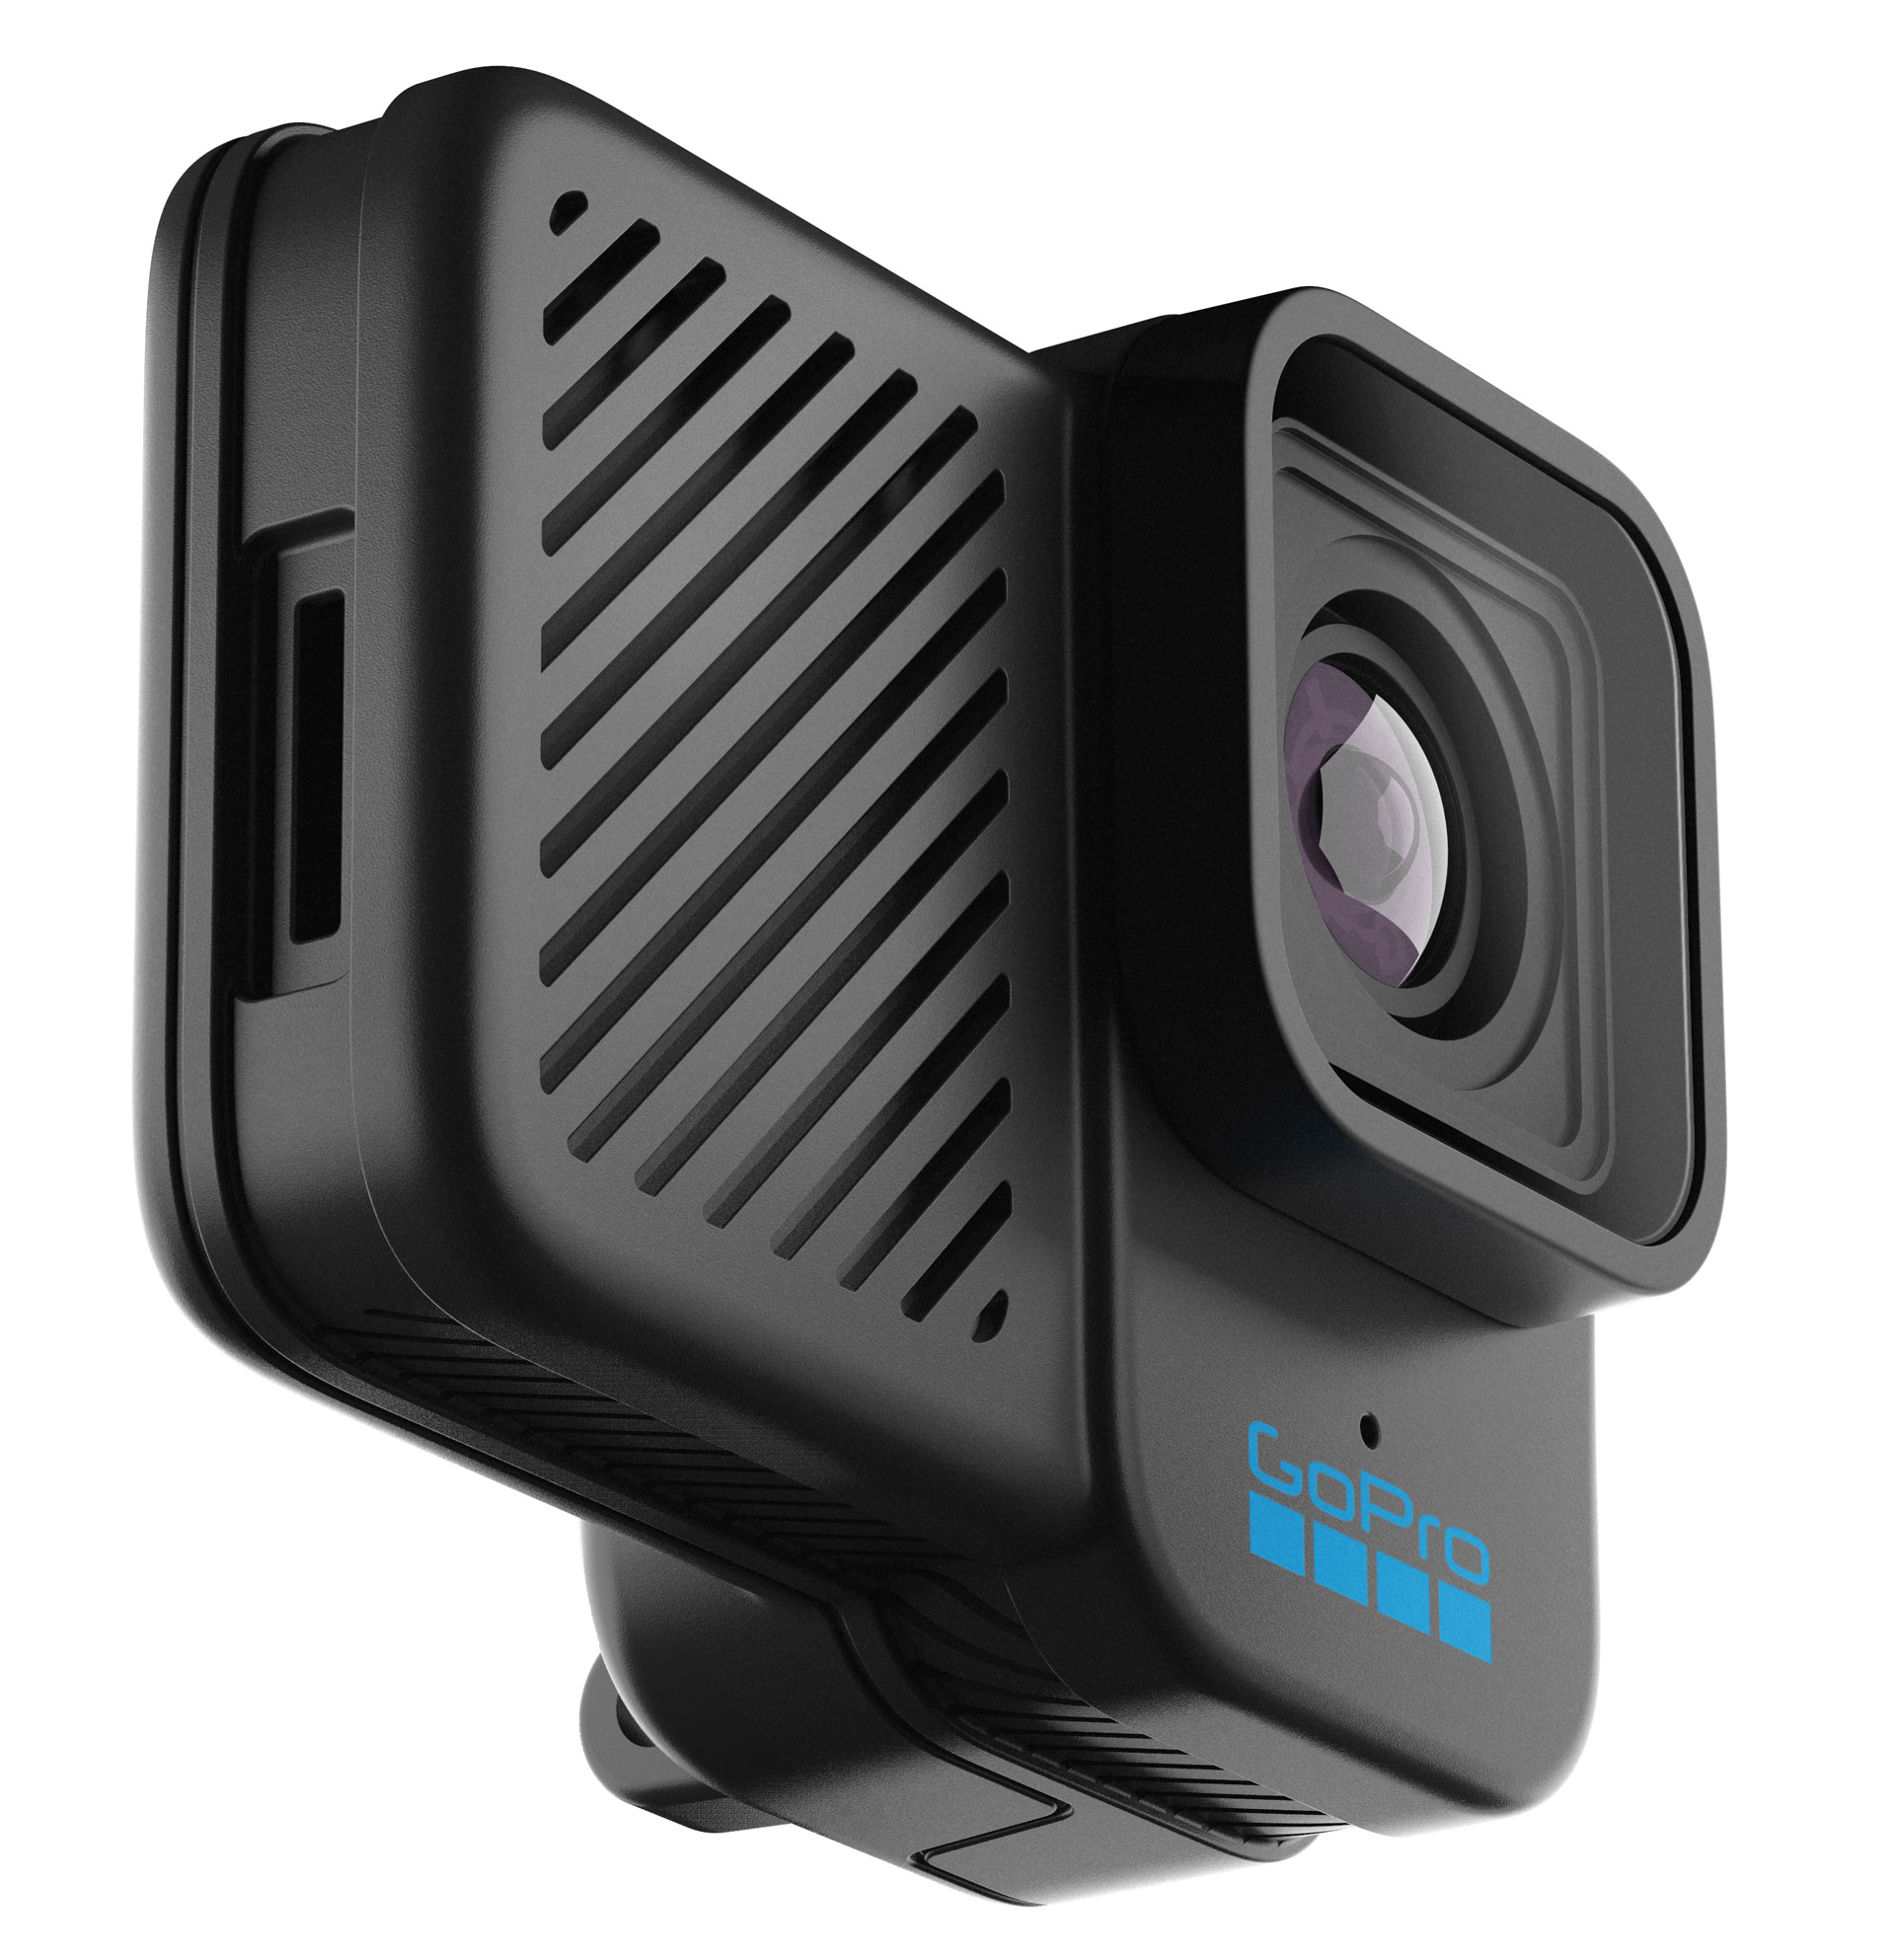 GoPro HERO10 Black Bones and GoPro Player with Improved ReelSteady Launched